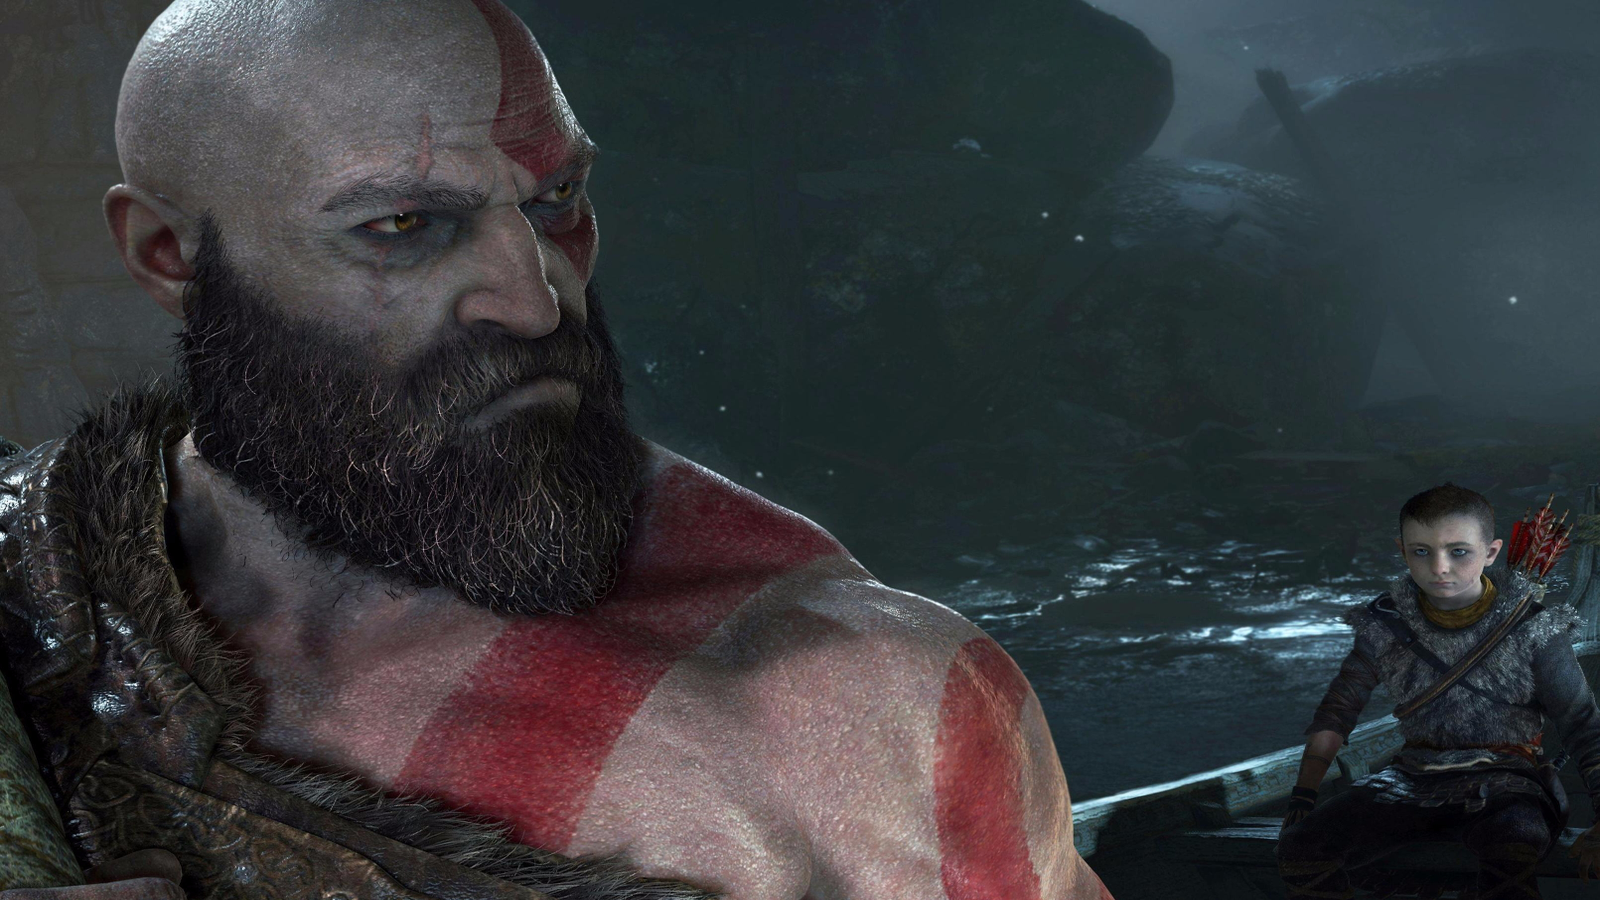 In God Of War 5, don't you feel bad for Thor? Unfortunately Kratos